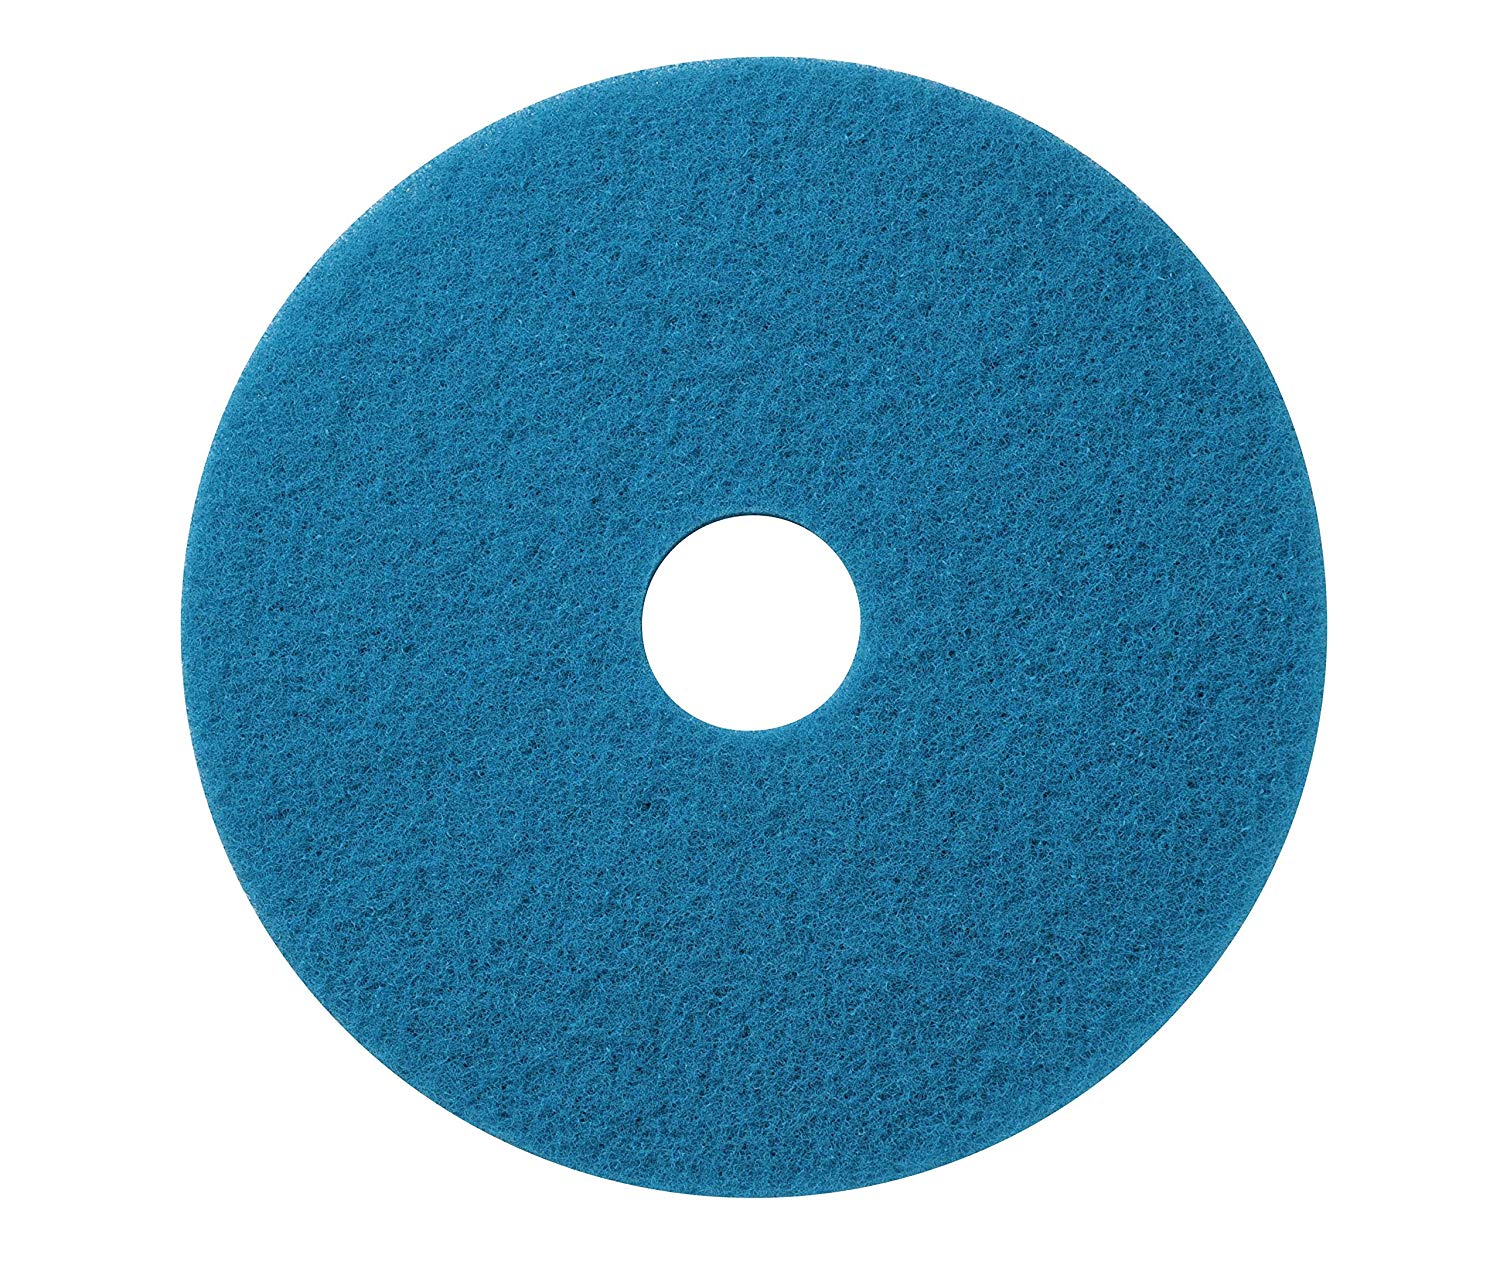 Americo Manufacturing 400418 Blue Cleaner Floor Scrubbing Pad (5 Pack), 18" - CalCleaningEquipment